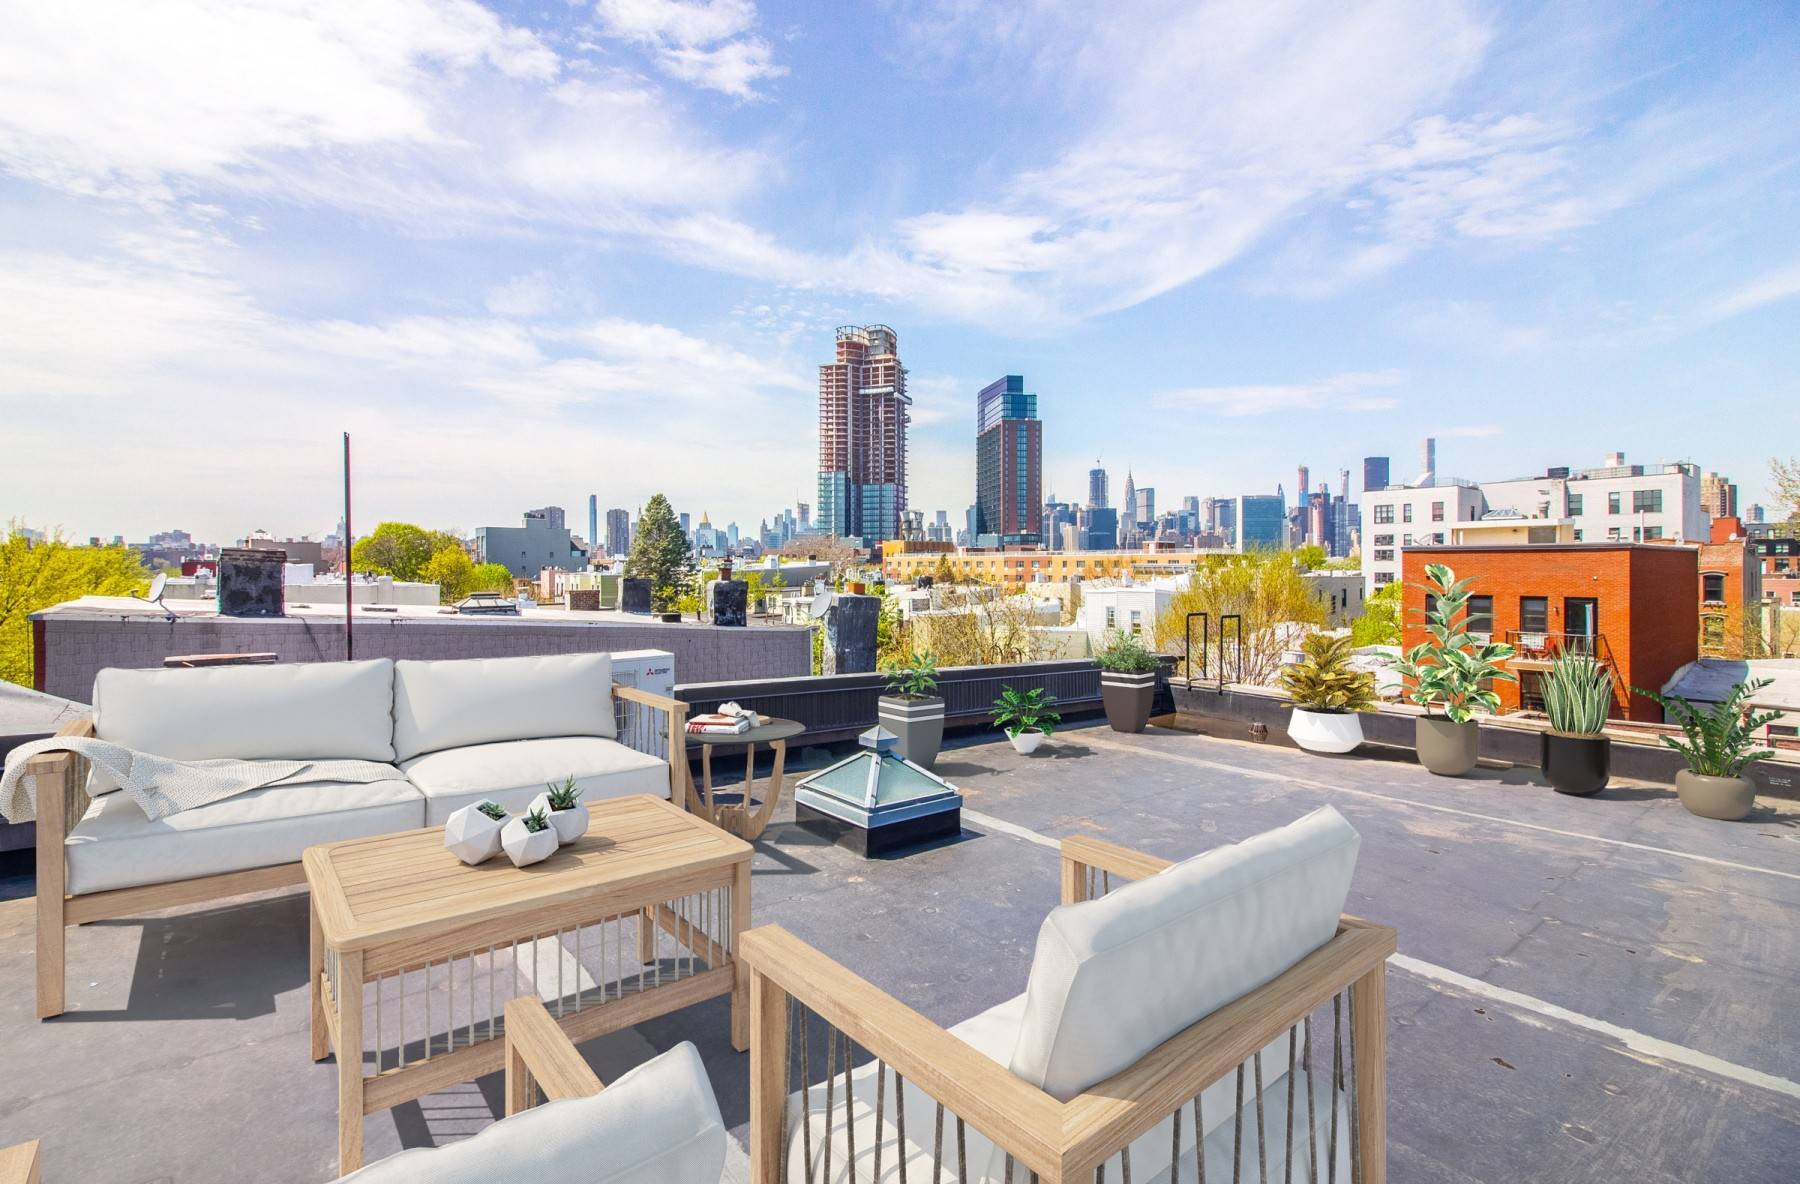 Standing on the roof of your new condo, you'll be able to see for miles.